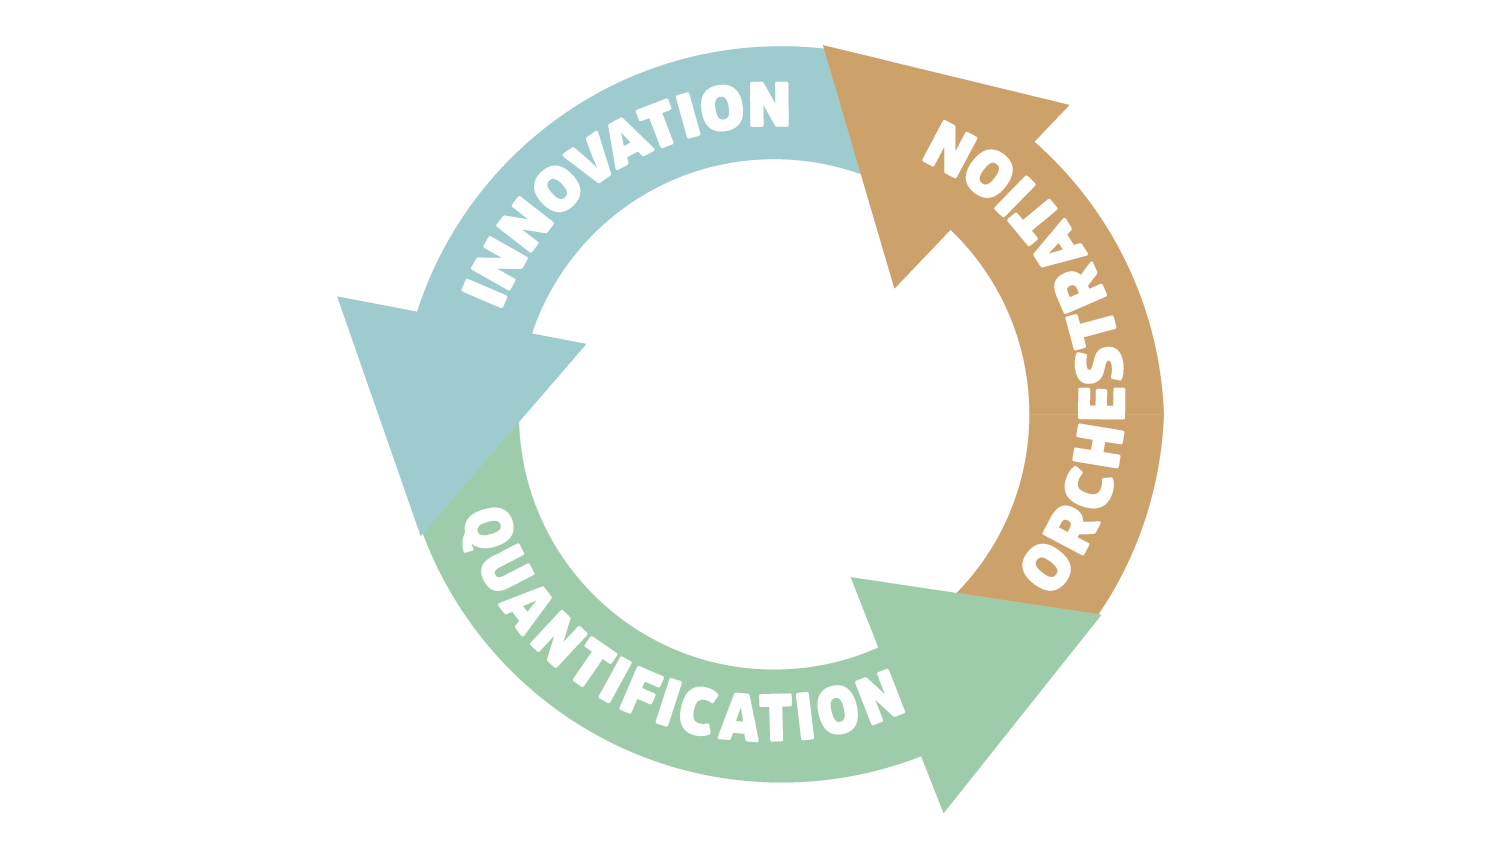 Innovation-Quantification-Orchestration-cycle